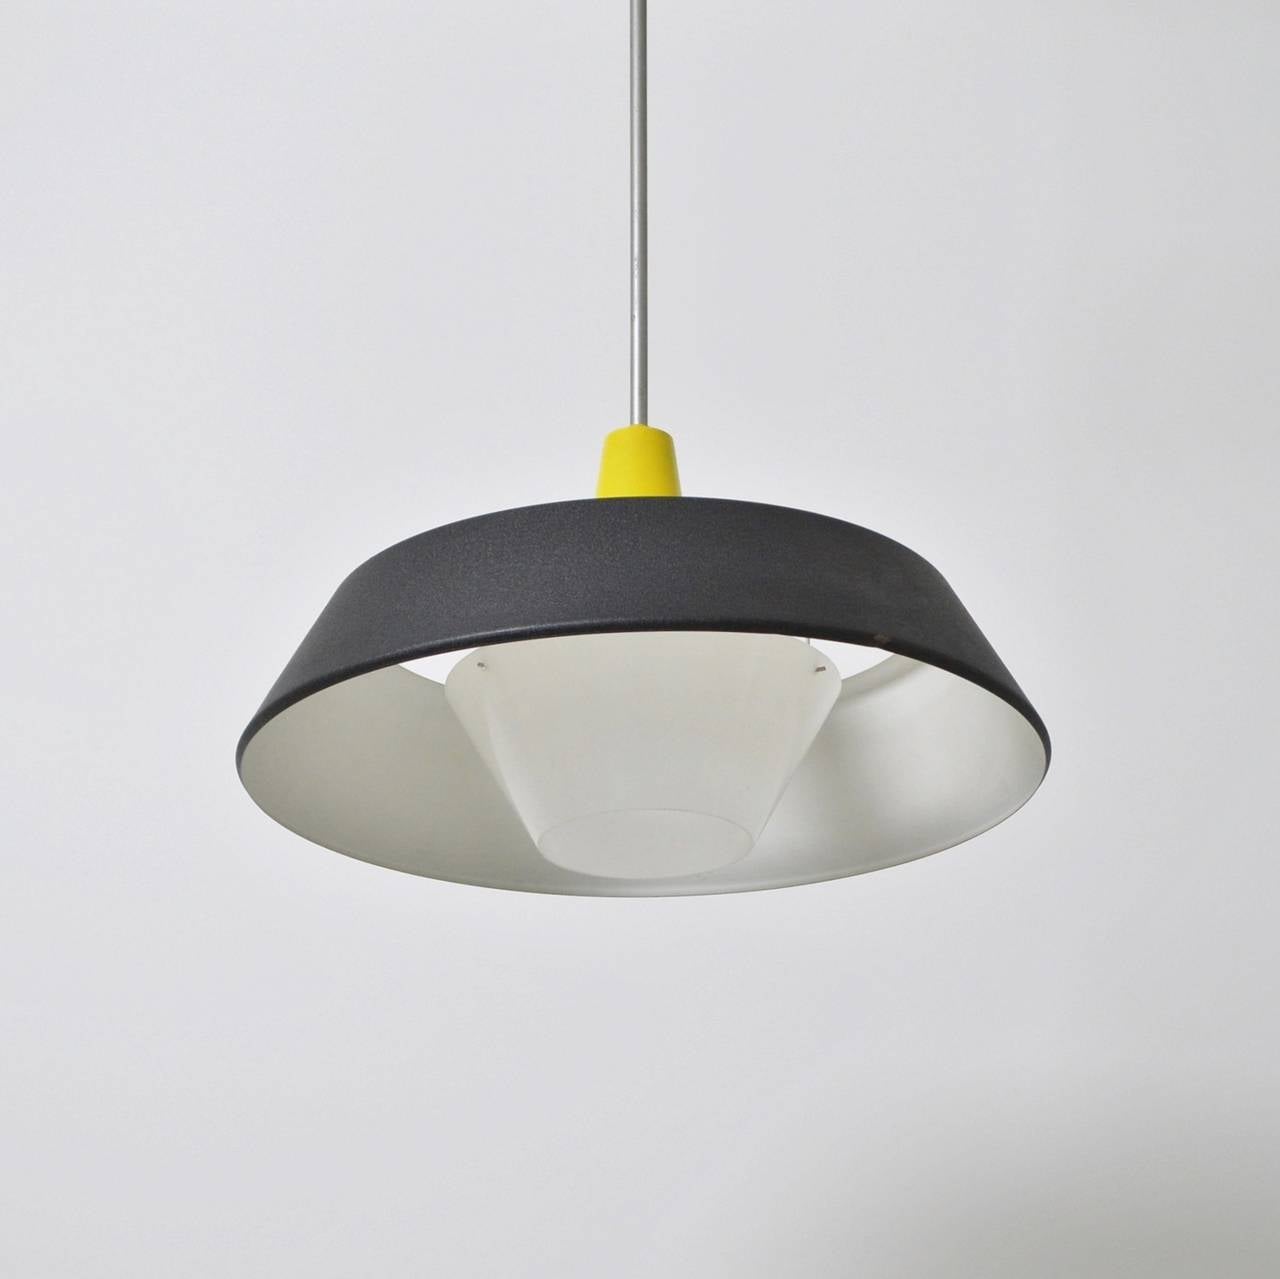 A striking yellow and black fixed ceiling pendant designed by the Philips  lighting design department headed by Louis Kalff. It was produced in Eindhoven by the Netherlands most prestigious electrical manufacturer. The metal hood has a textured